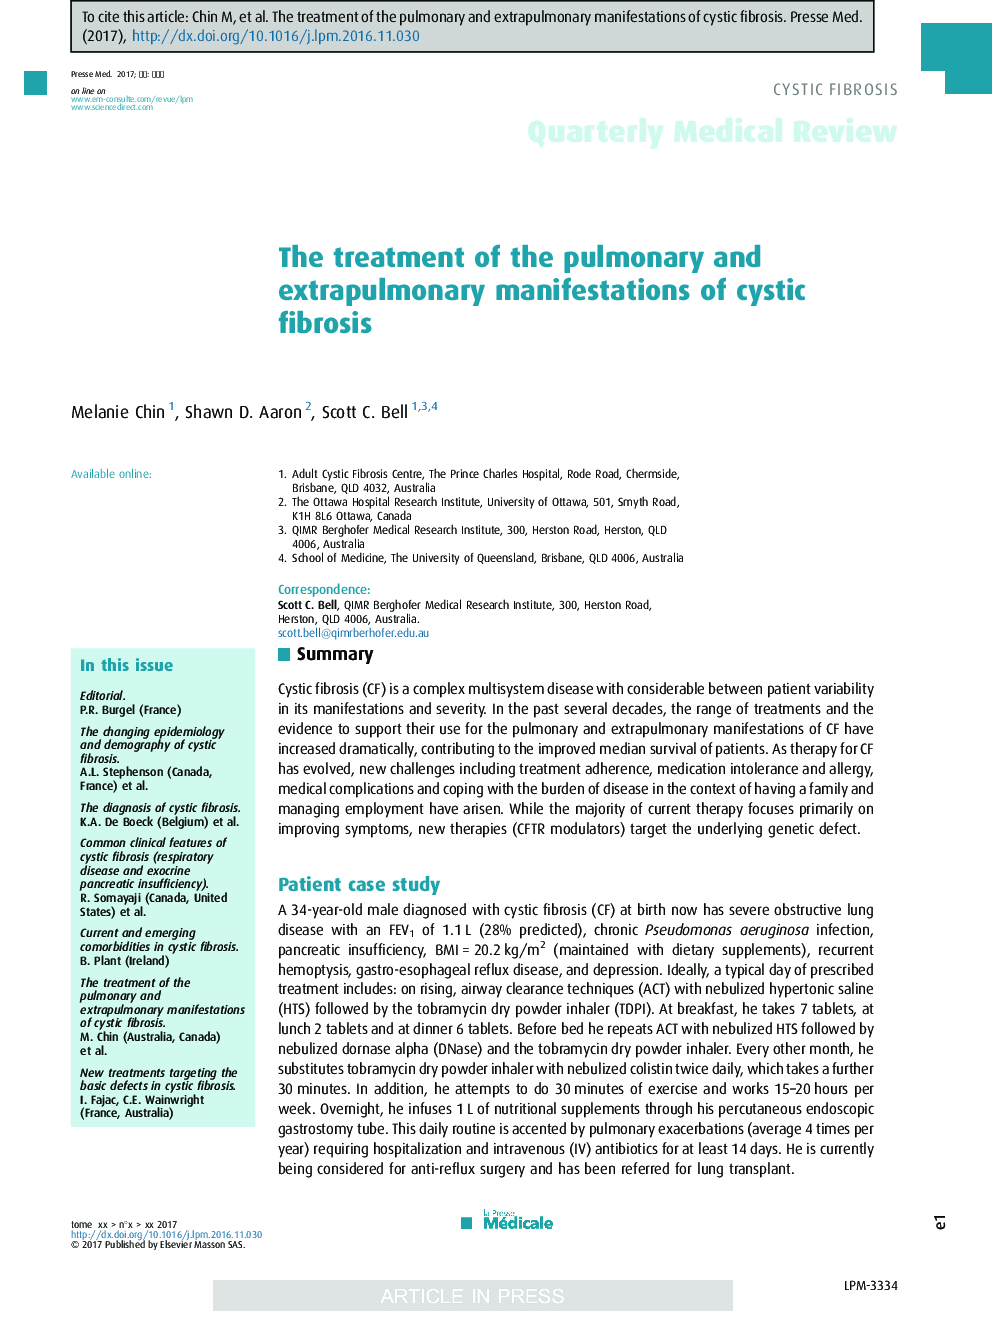 The treatment of the pulmonary and extrapulmonary manifestations of cystic fibrosis